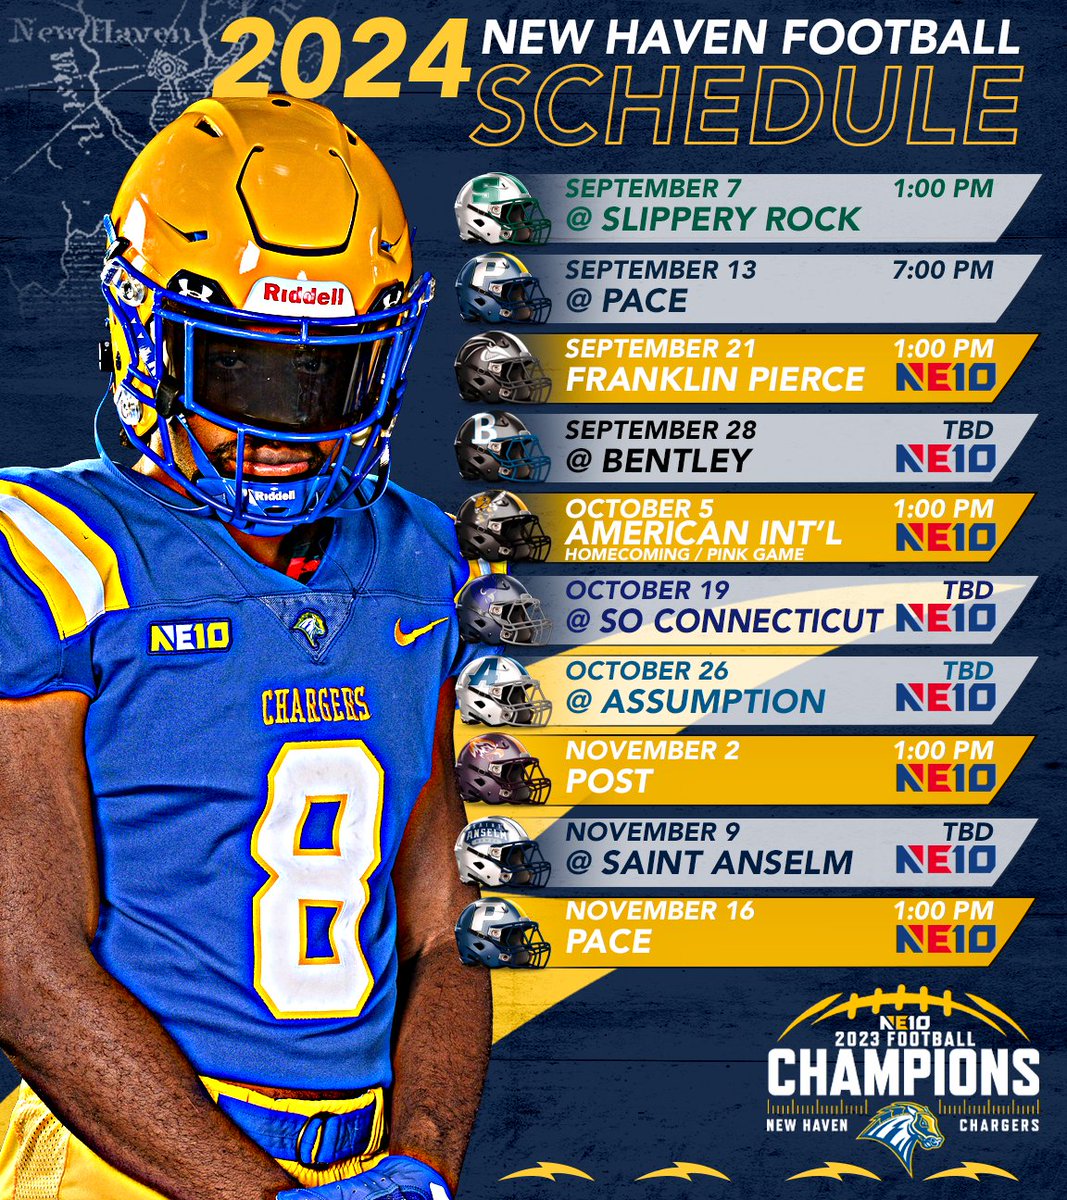 𝐌𝐚𝐫𝐤 𝐲𝐨𝐮𝐫 𝐜𝐚𝐥𝐞𝐧𝐝𝐚𝐫𝐬..🗓️ Football will be back on the Blue & Gold turf before you know it #PowerOn